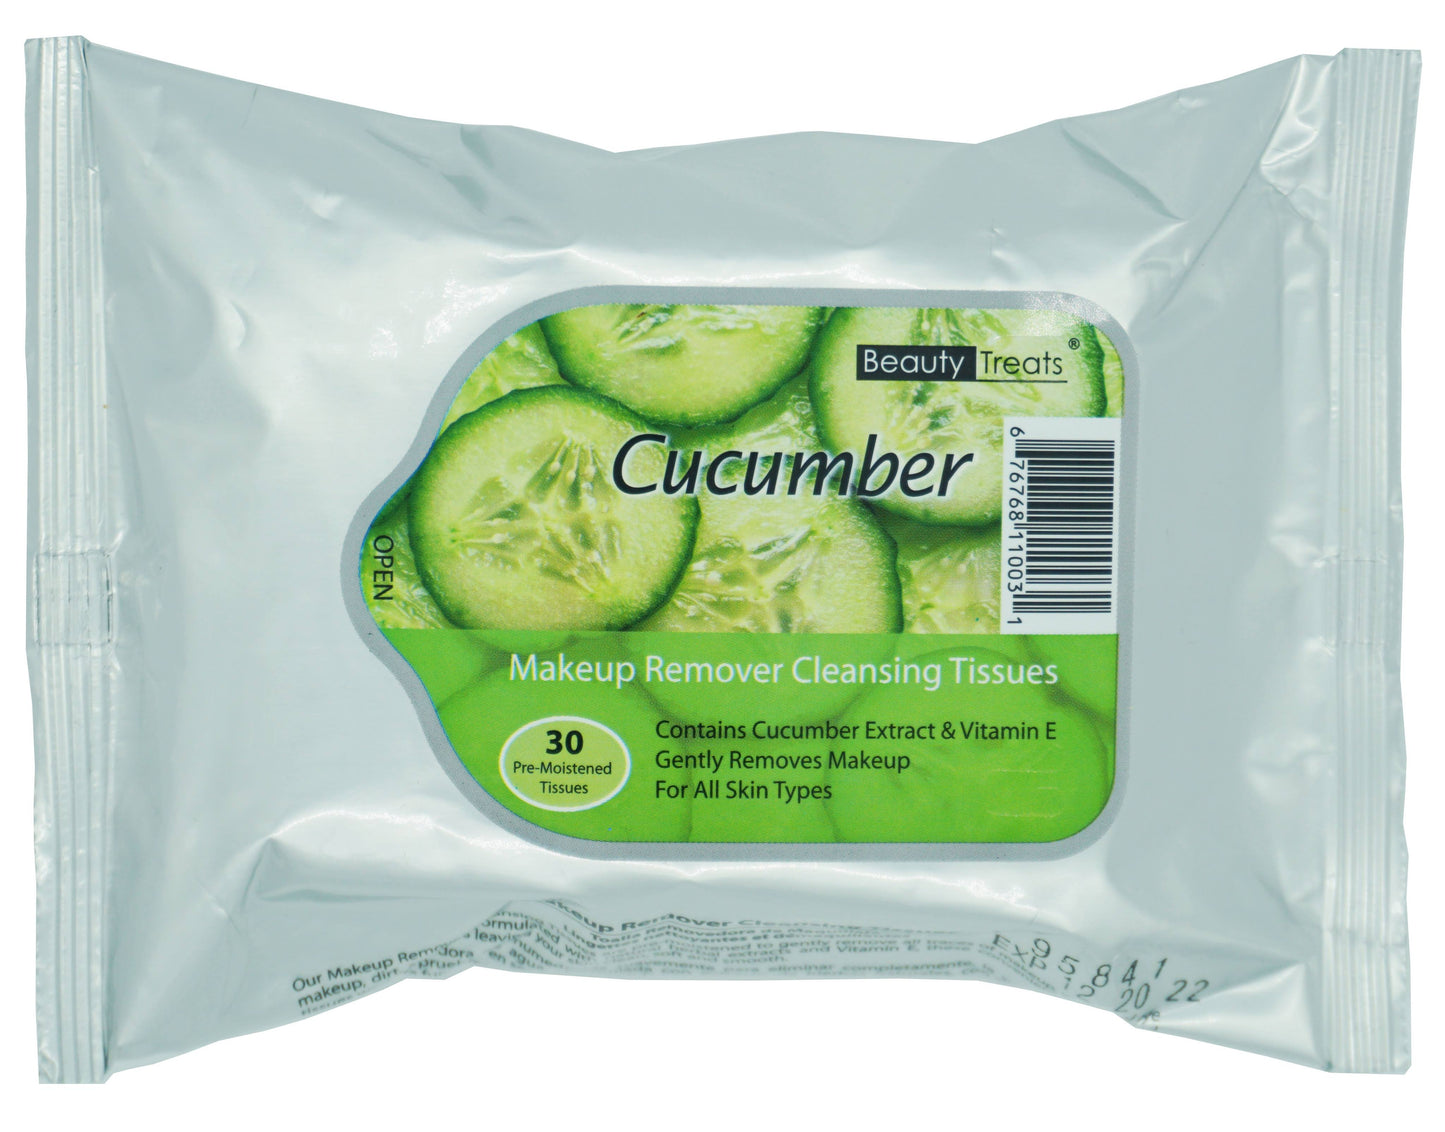 Cucumber Makeup Remover Cleansing Tissues